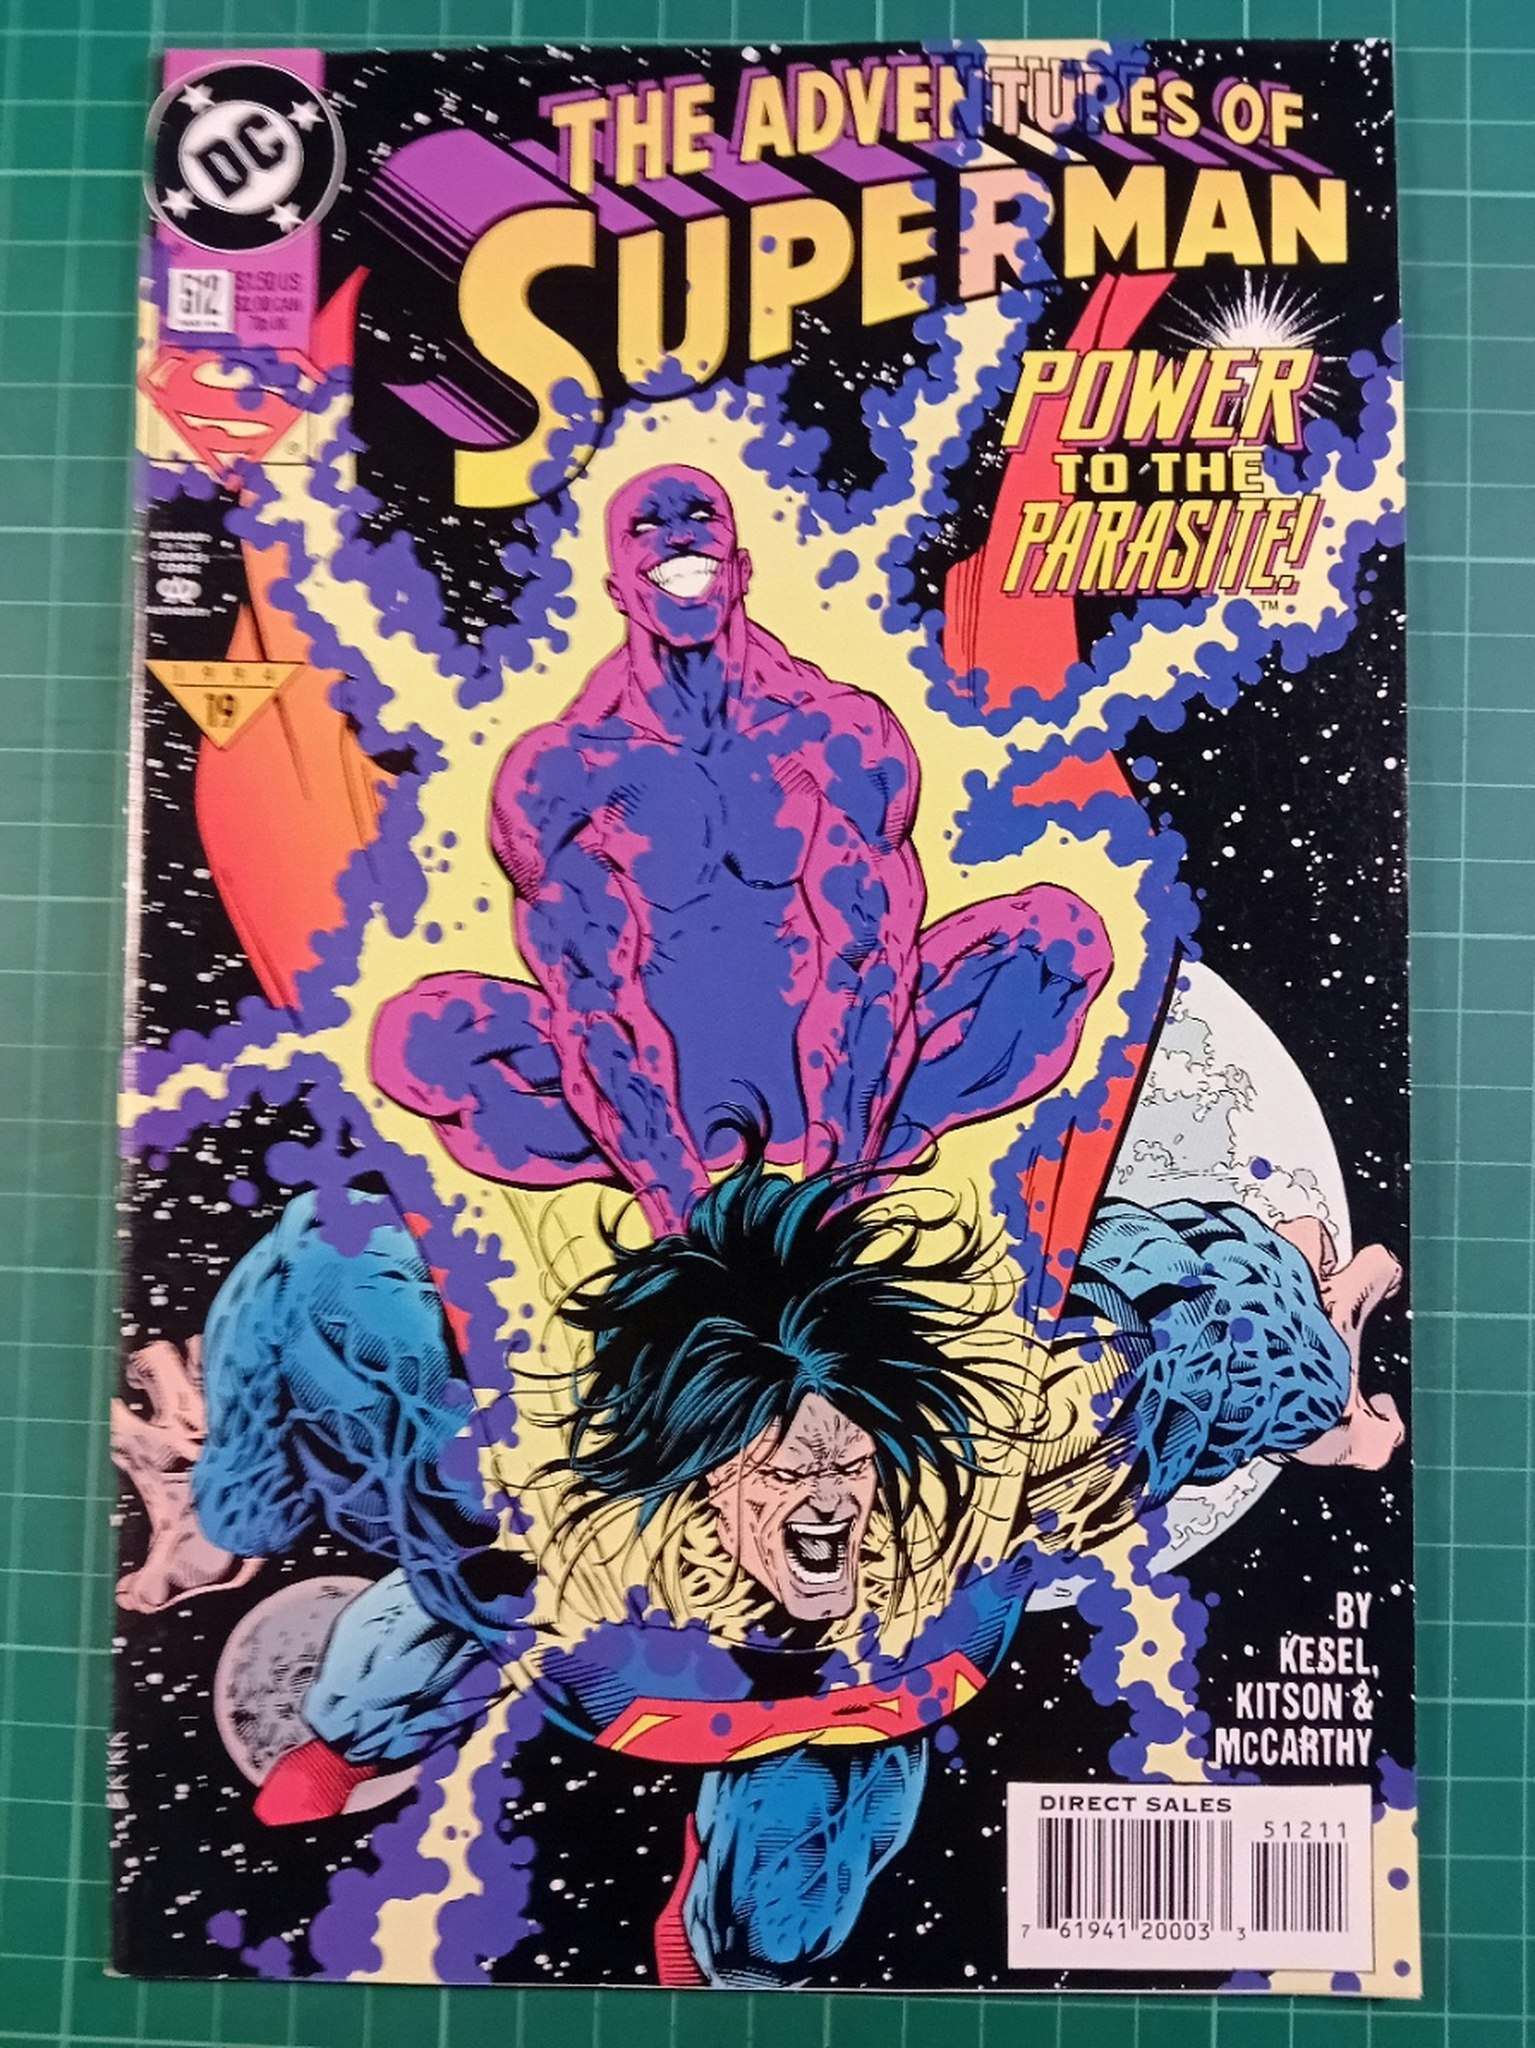 The adventures of Superman #512